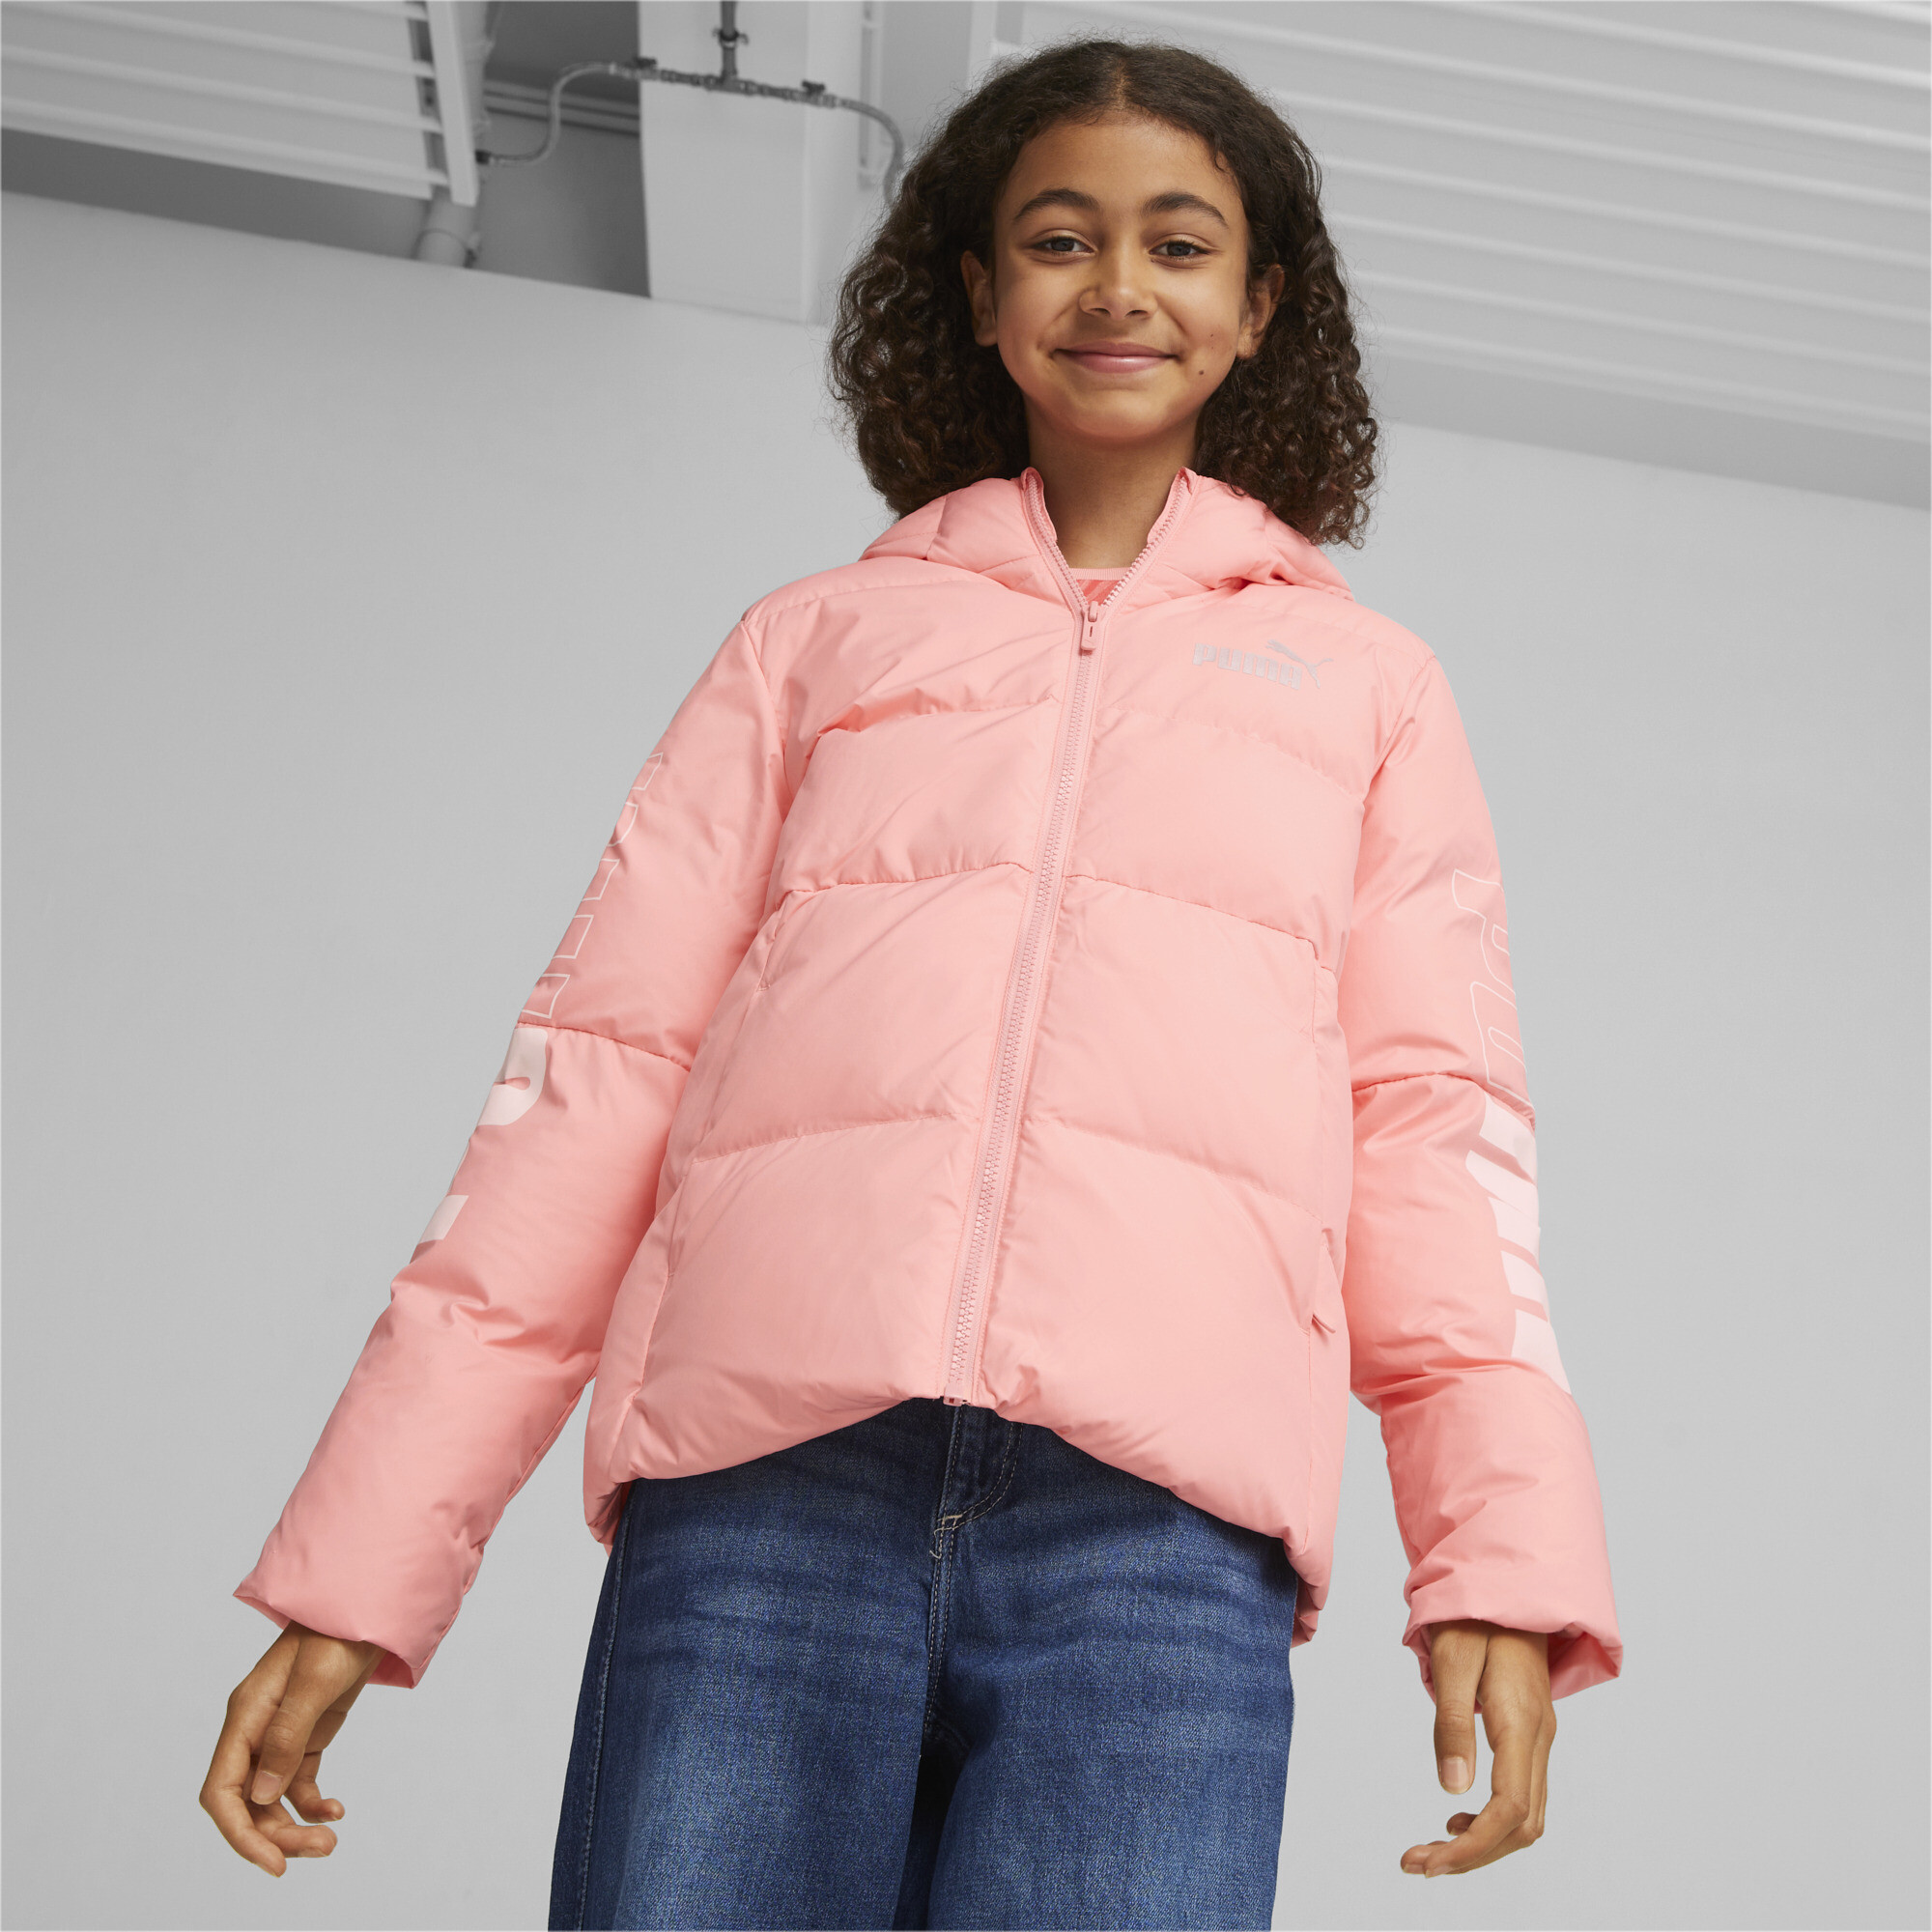 Puma POWER Youth Hooded Jacket, Pink, Size 9-10Y, Clothing